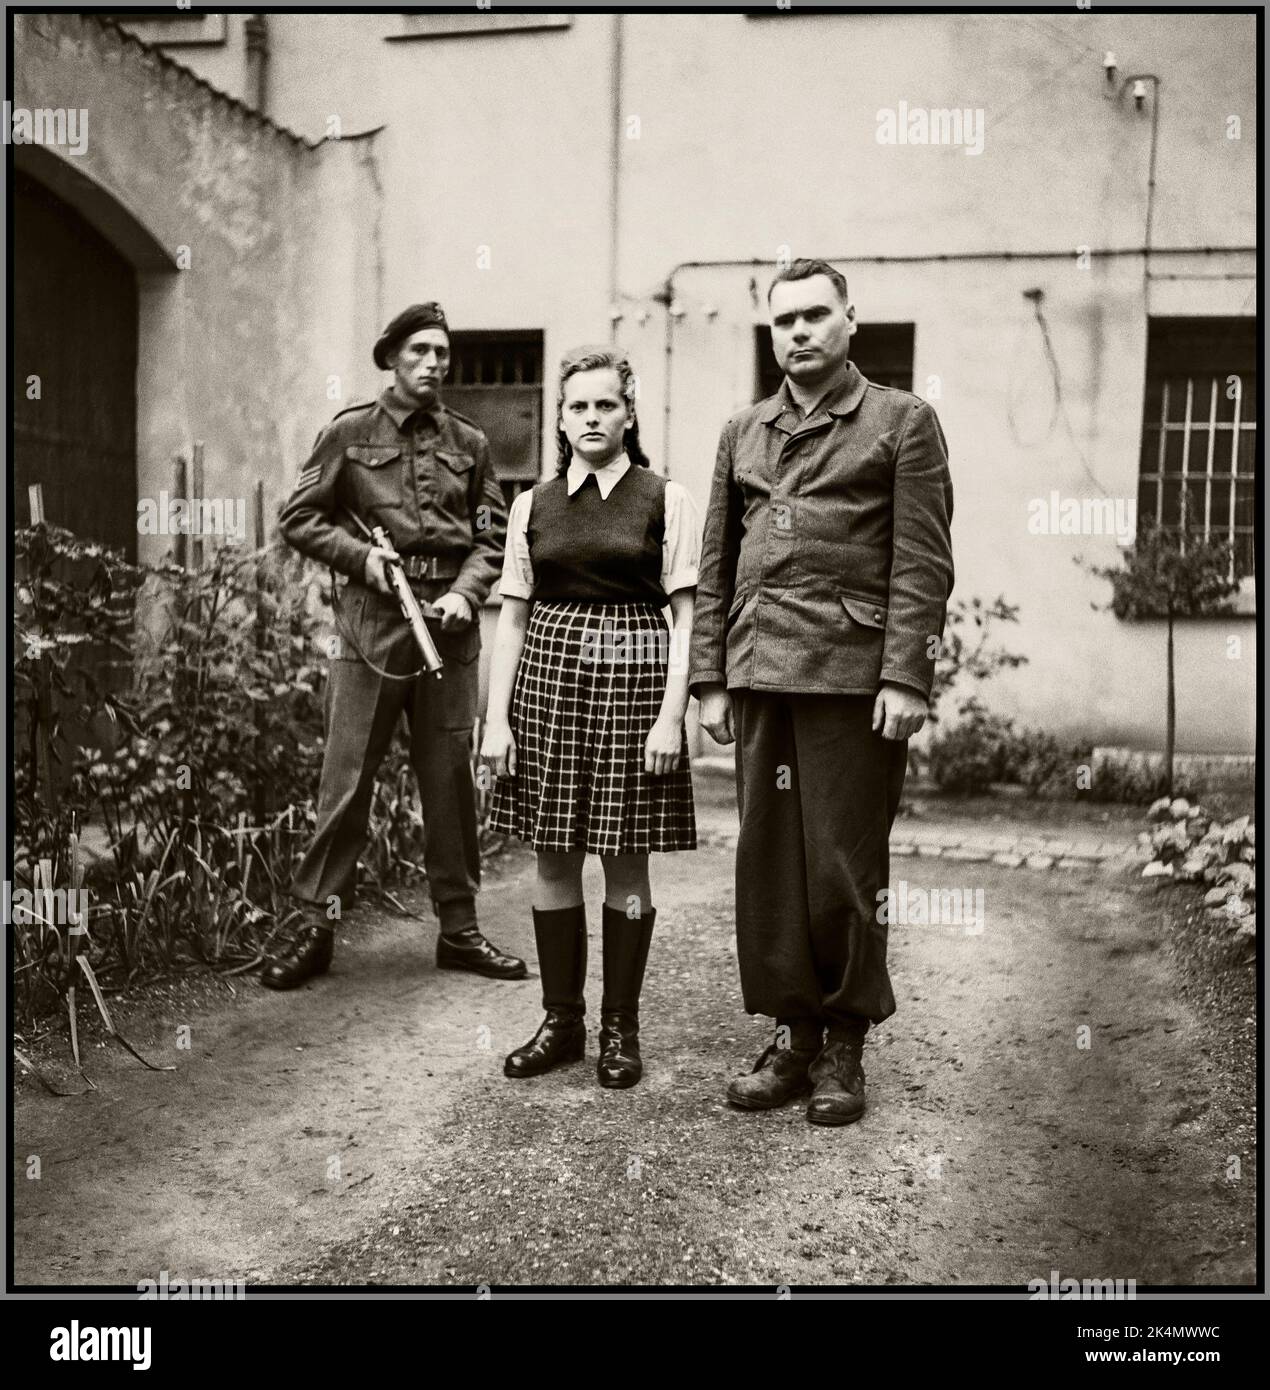 IRMA GRESE NAZI CONCENTRATION CAMP GUARD (left) Irma Ilse Ida Grese (7 October 1923 – 13 December 1945) was a Nazi concentration camp guard at Ravensbrück and Auschwitz, and served as warden of the women's section of Bergen-Belsen. Together with Joseph Kramer BEAST OF BELSEN Hauptsturmführer and the Commandant of Auschwitz-Birkenau and of the Bergen-Belsen concentration camps.  Being guarded in custody by a British soldier. Two  sadistic Nazi concentration camp officials who were executed for their war crimes against humanity. Stock Photo